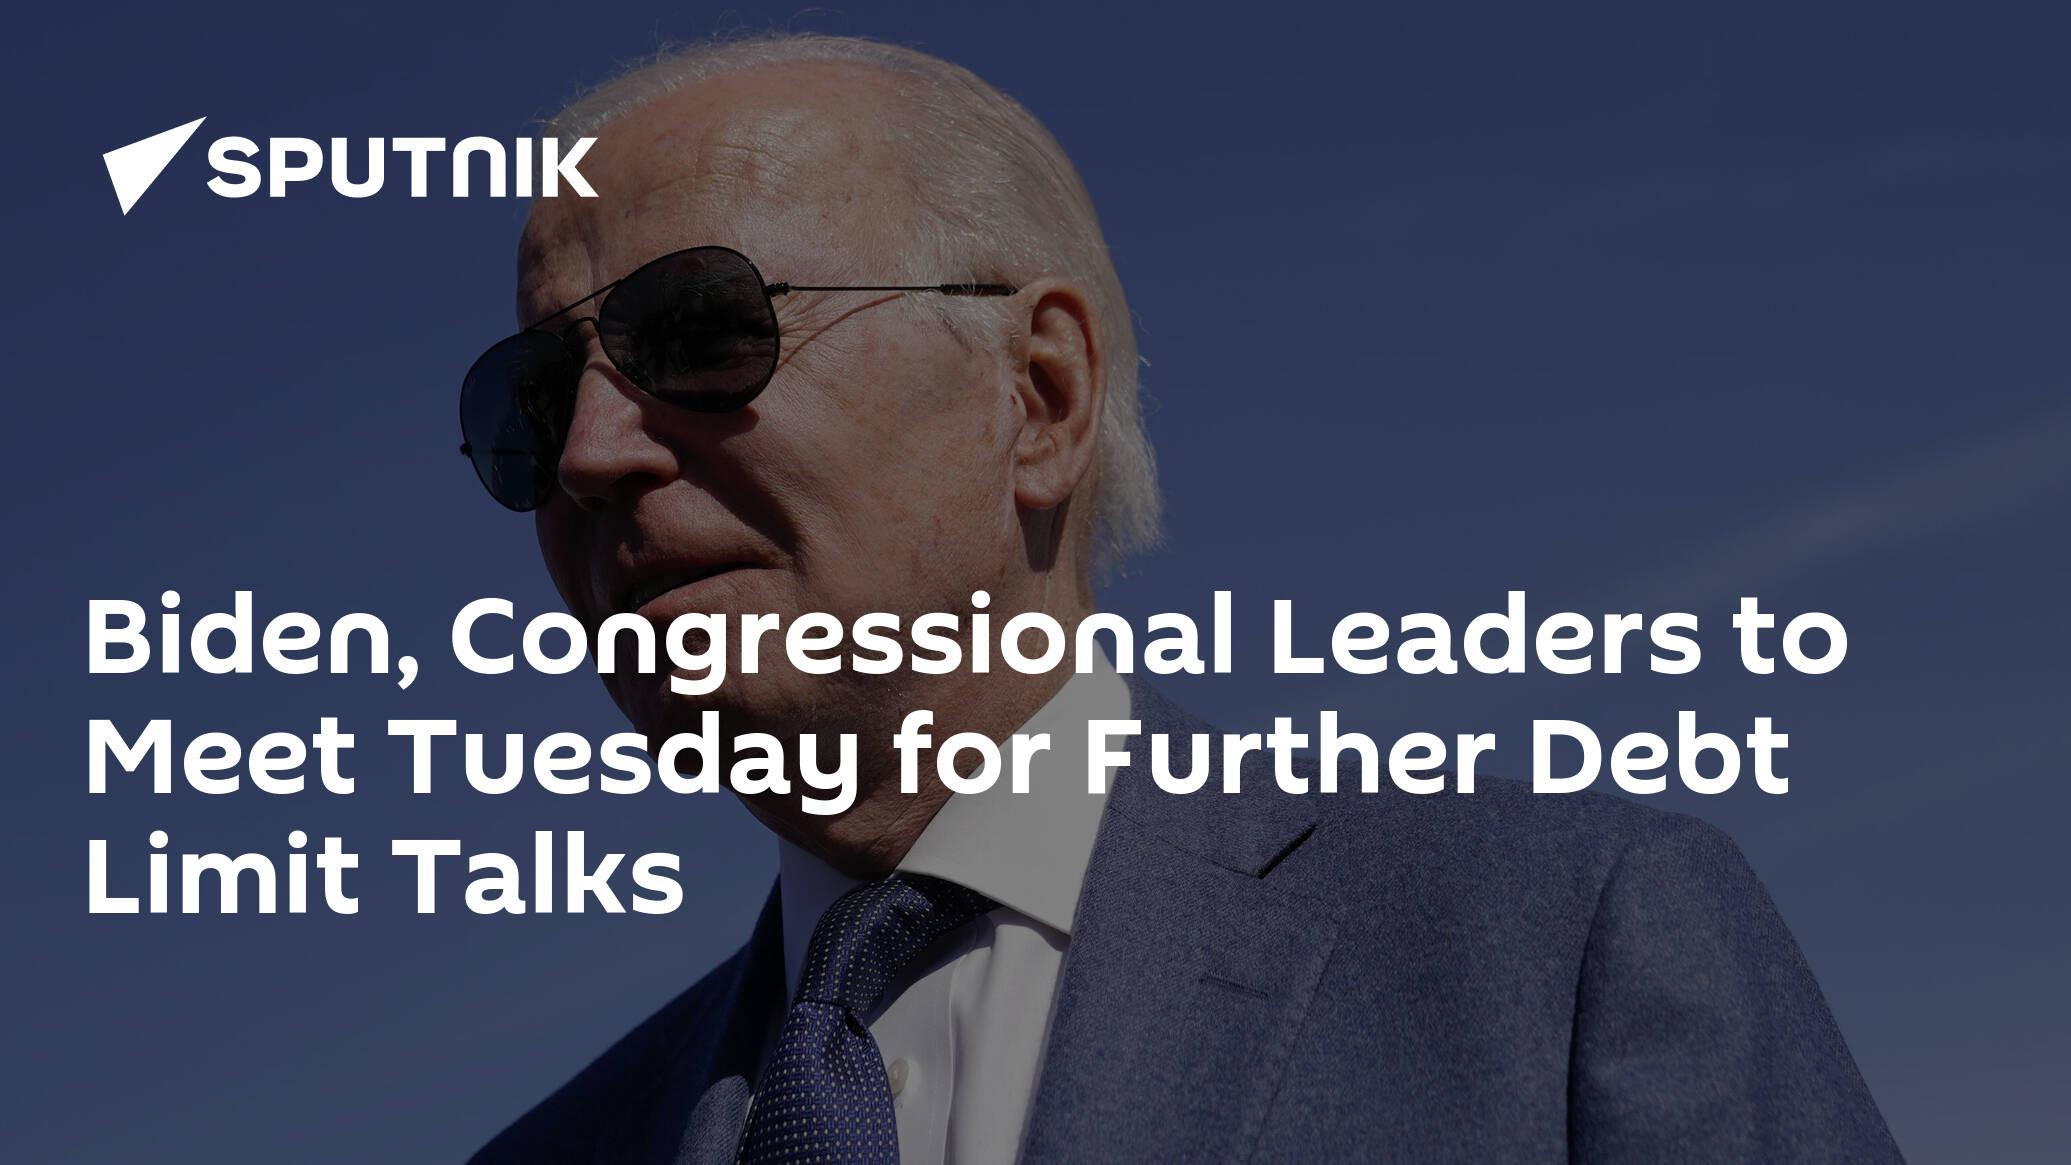 Biden, Congressional Leaders to Meet Tuesday for Further Debt Limit Talks